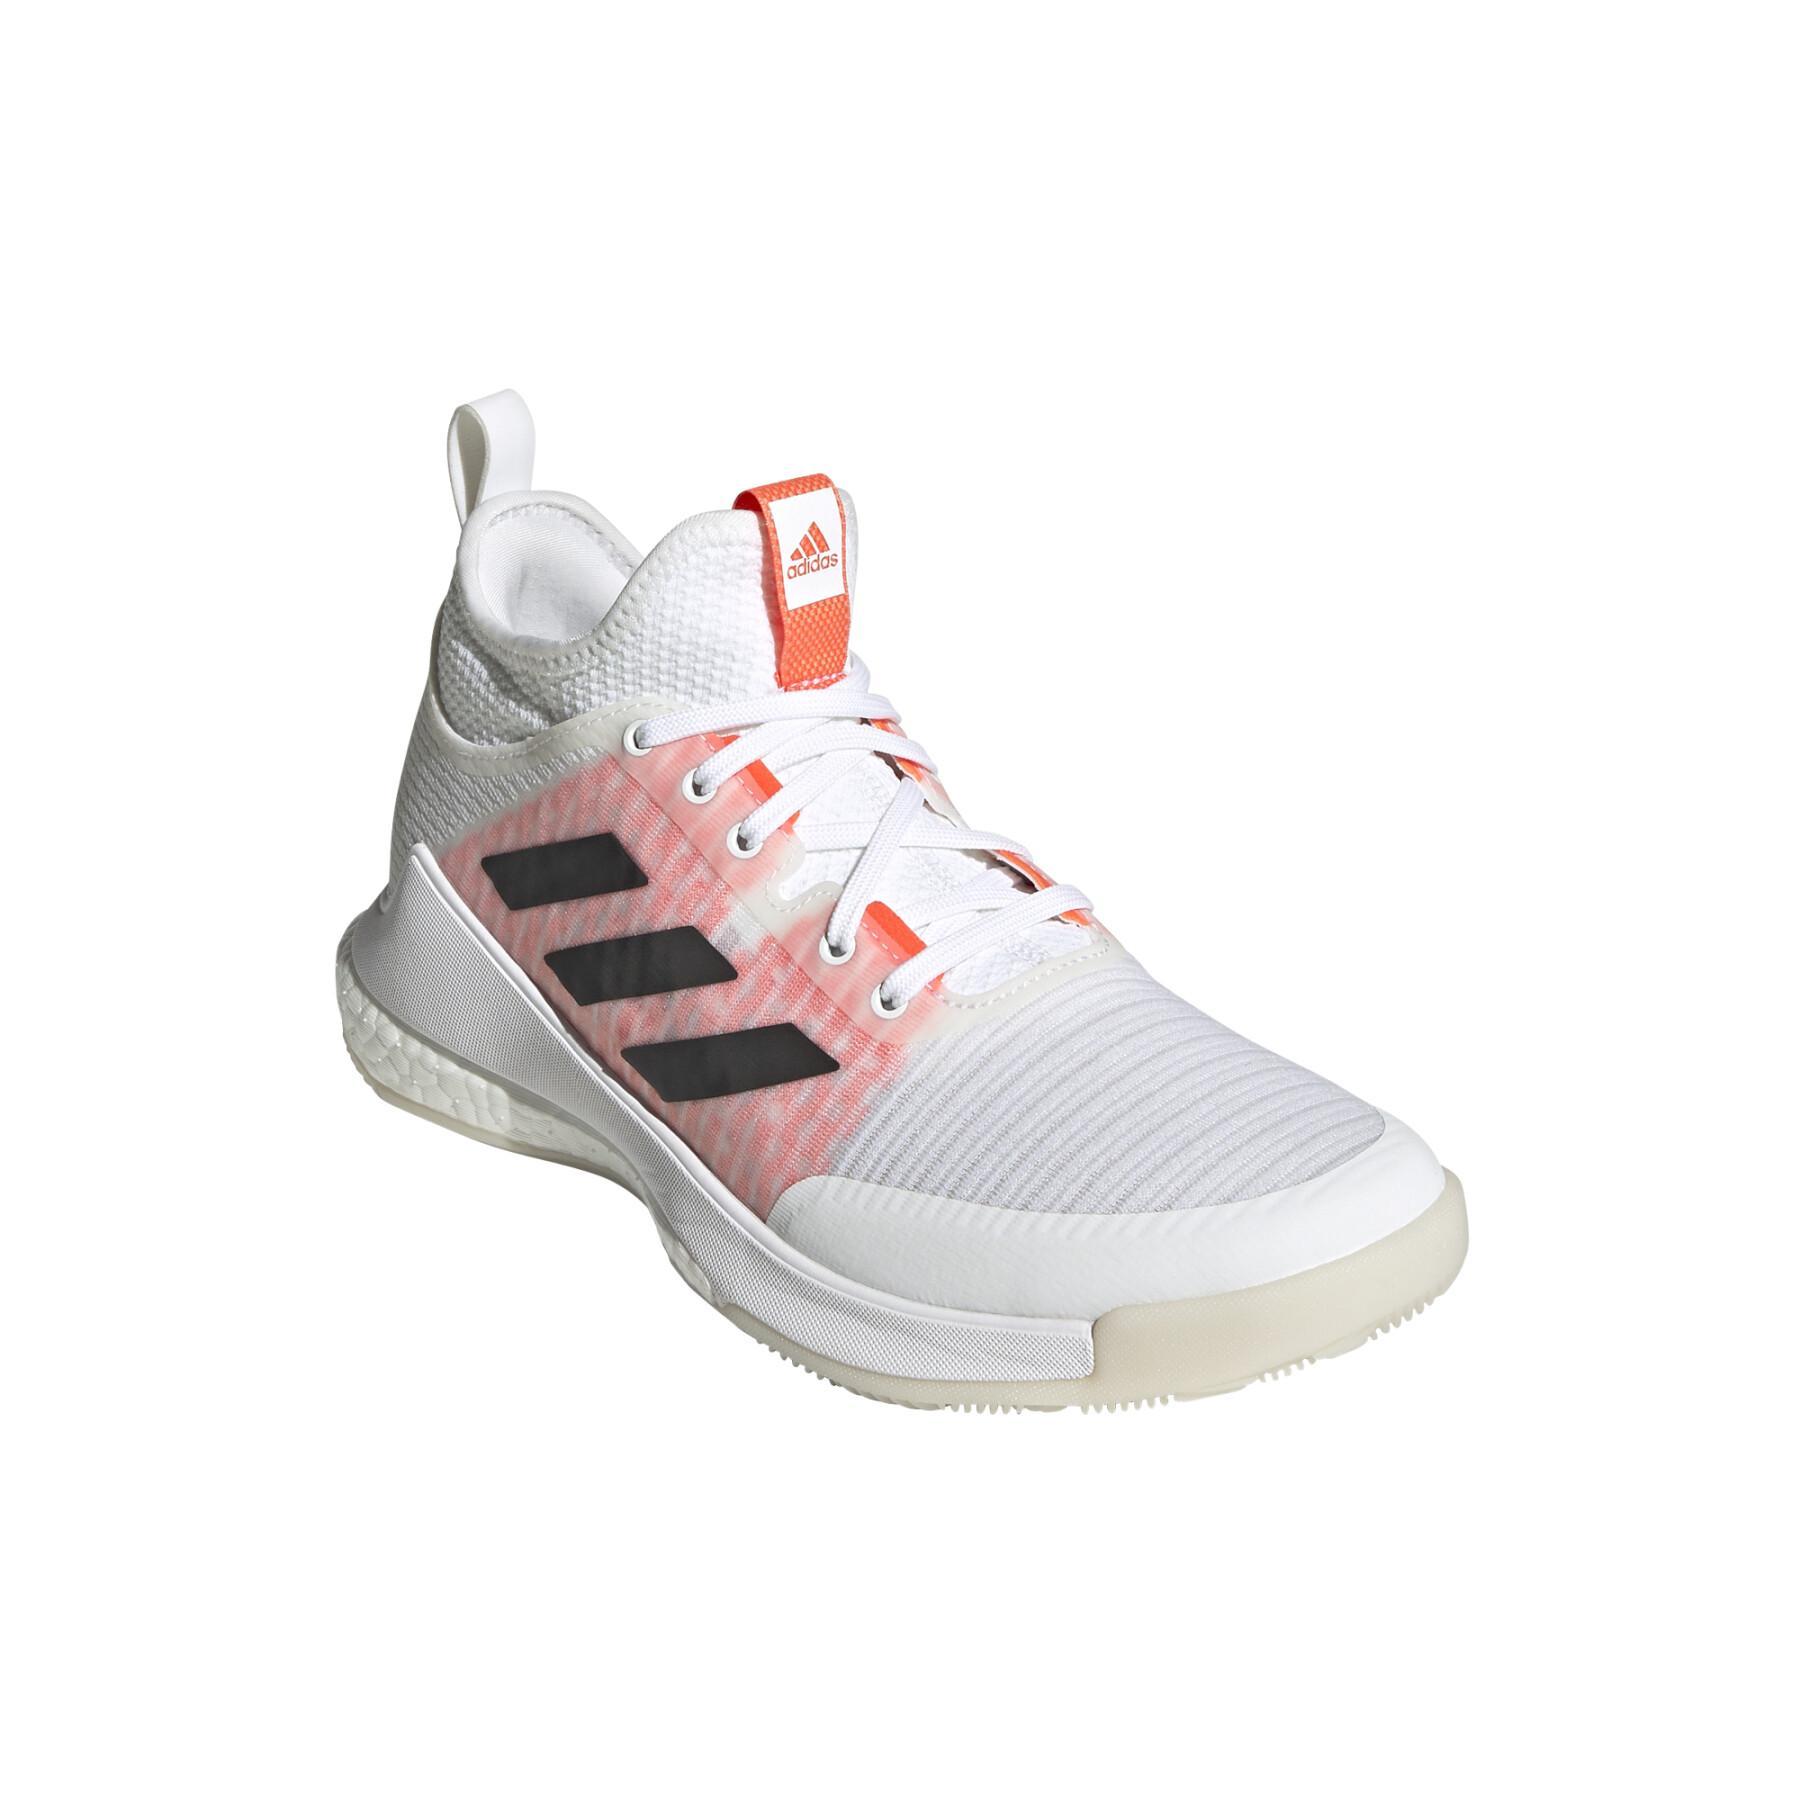 Taxpayer pick Go down Chaussures femme adidas Crazyflight mid Volleyball